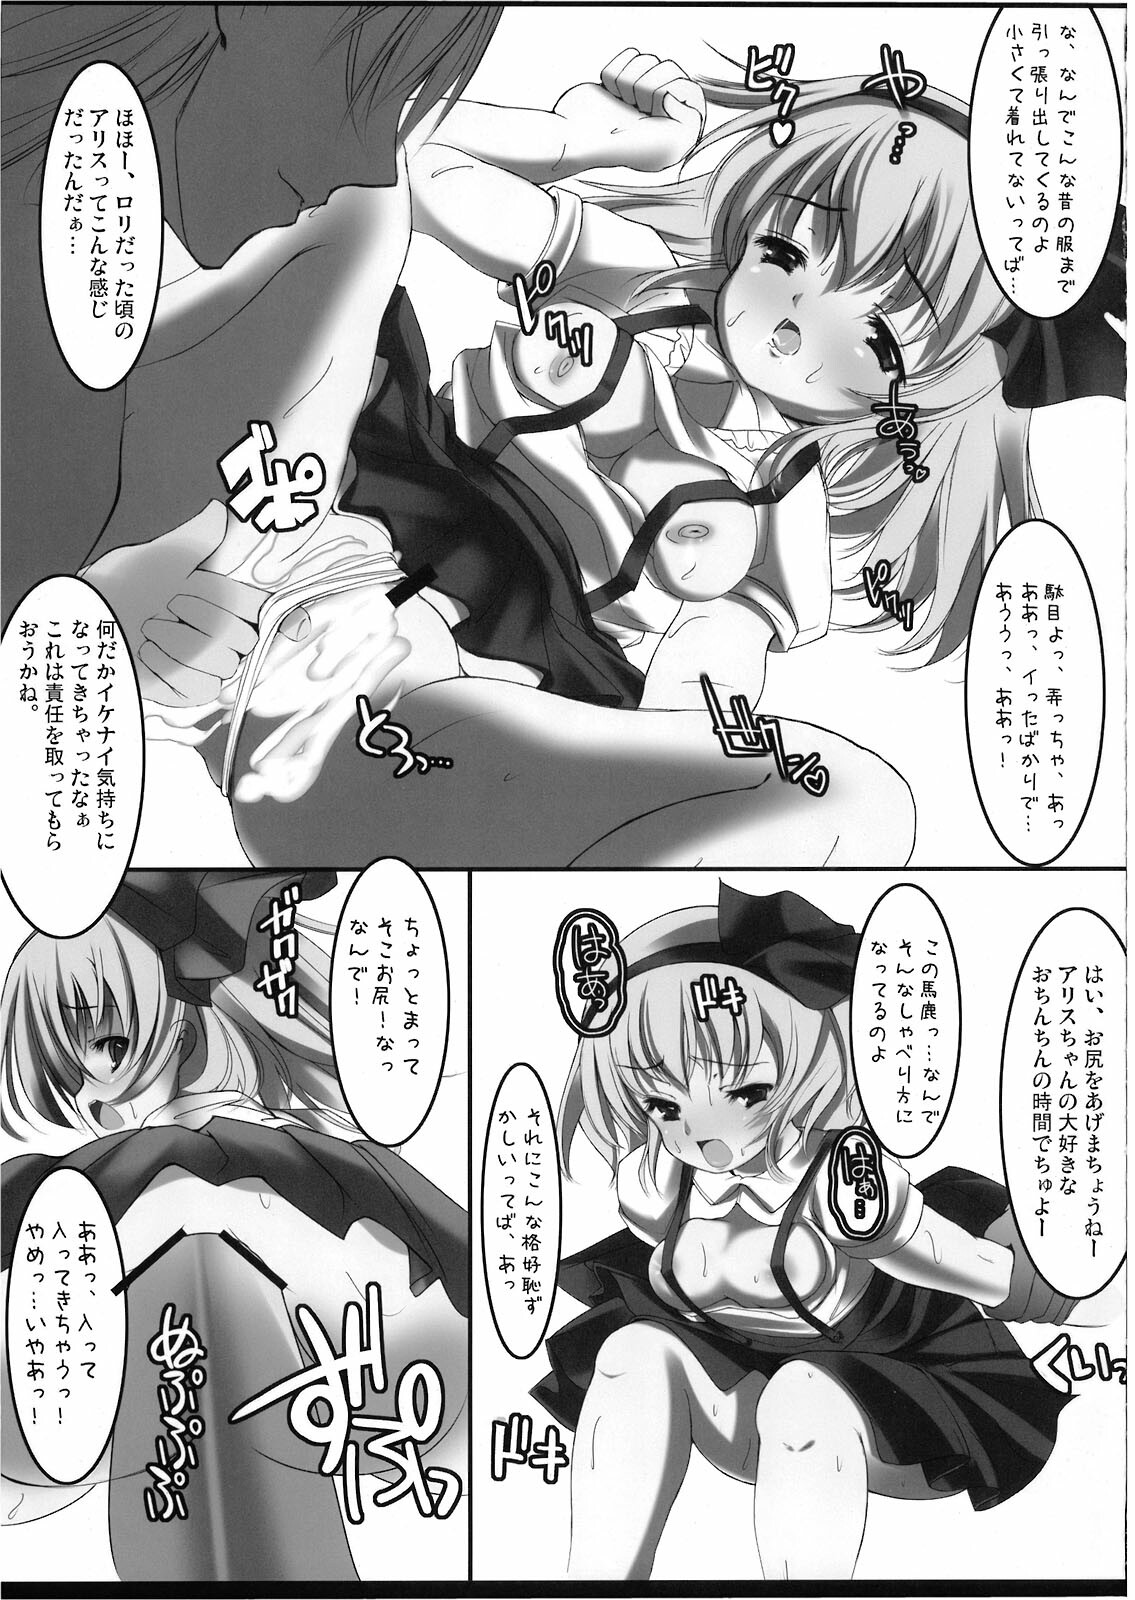 [EARNESTLY JET CITY] 幻想郷 爆!! (Touhou) page 25 full